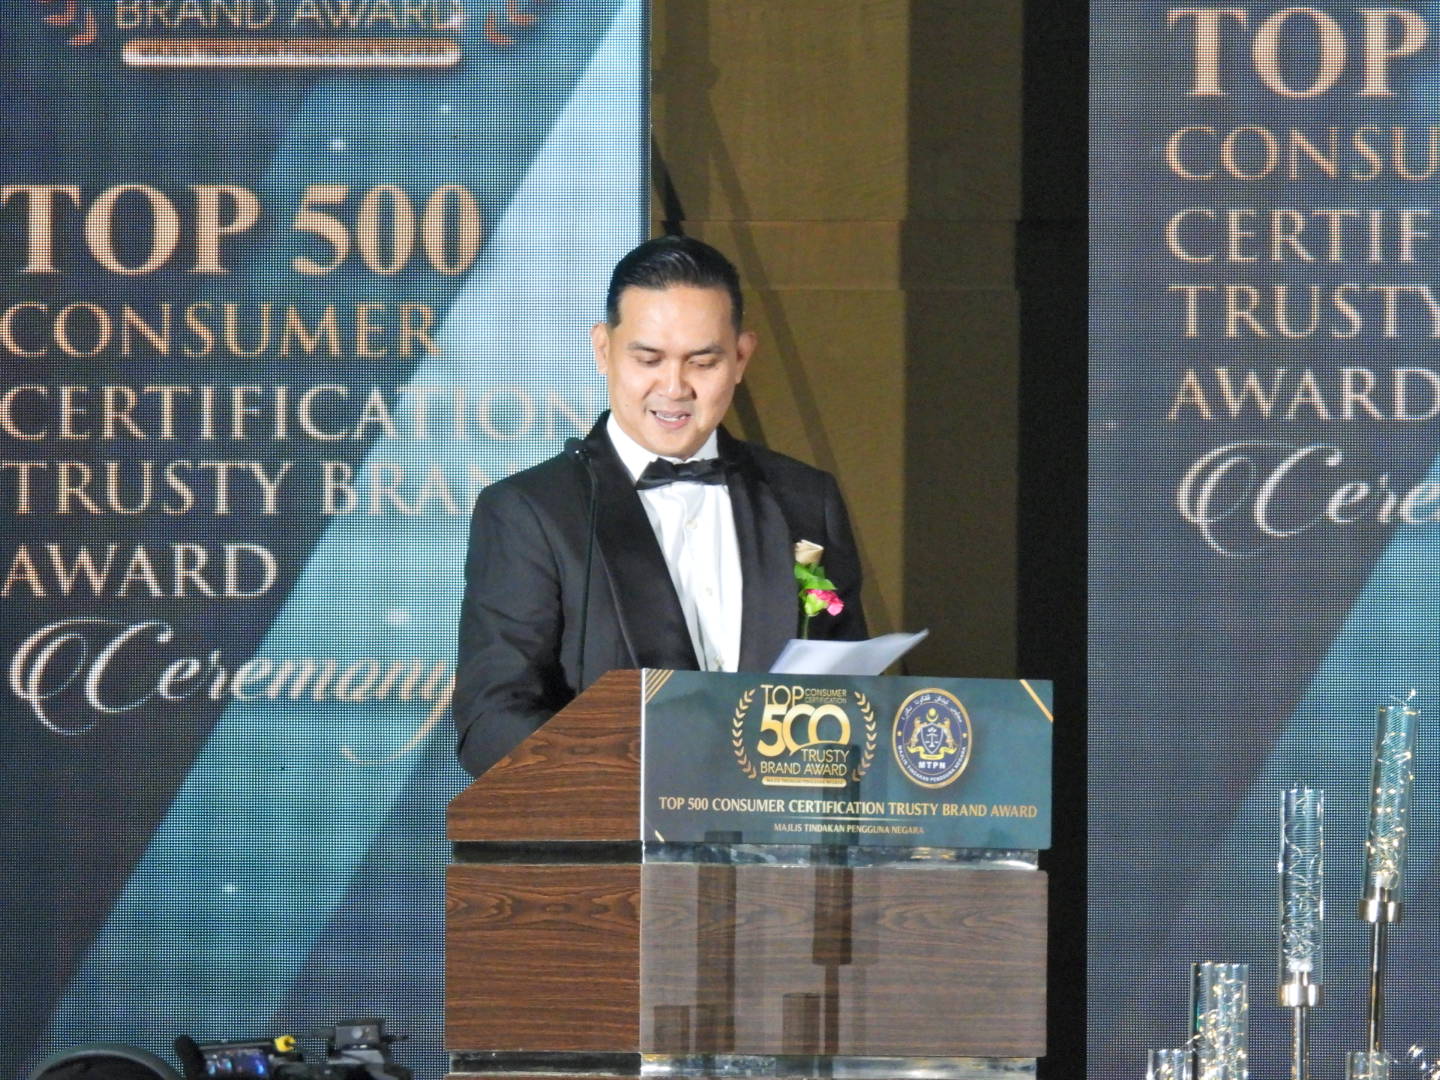 Award Ceremony for the Top 500 Consumer Certification Trusty Brands